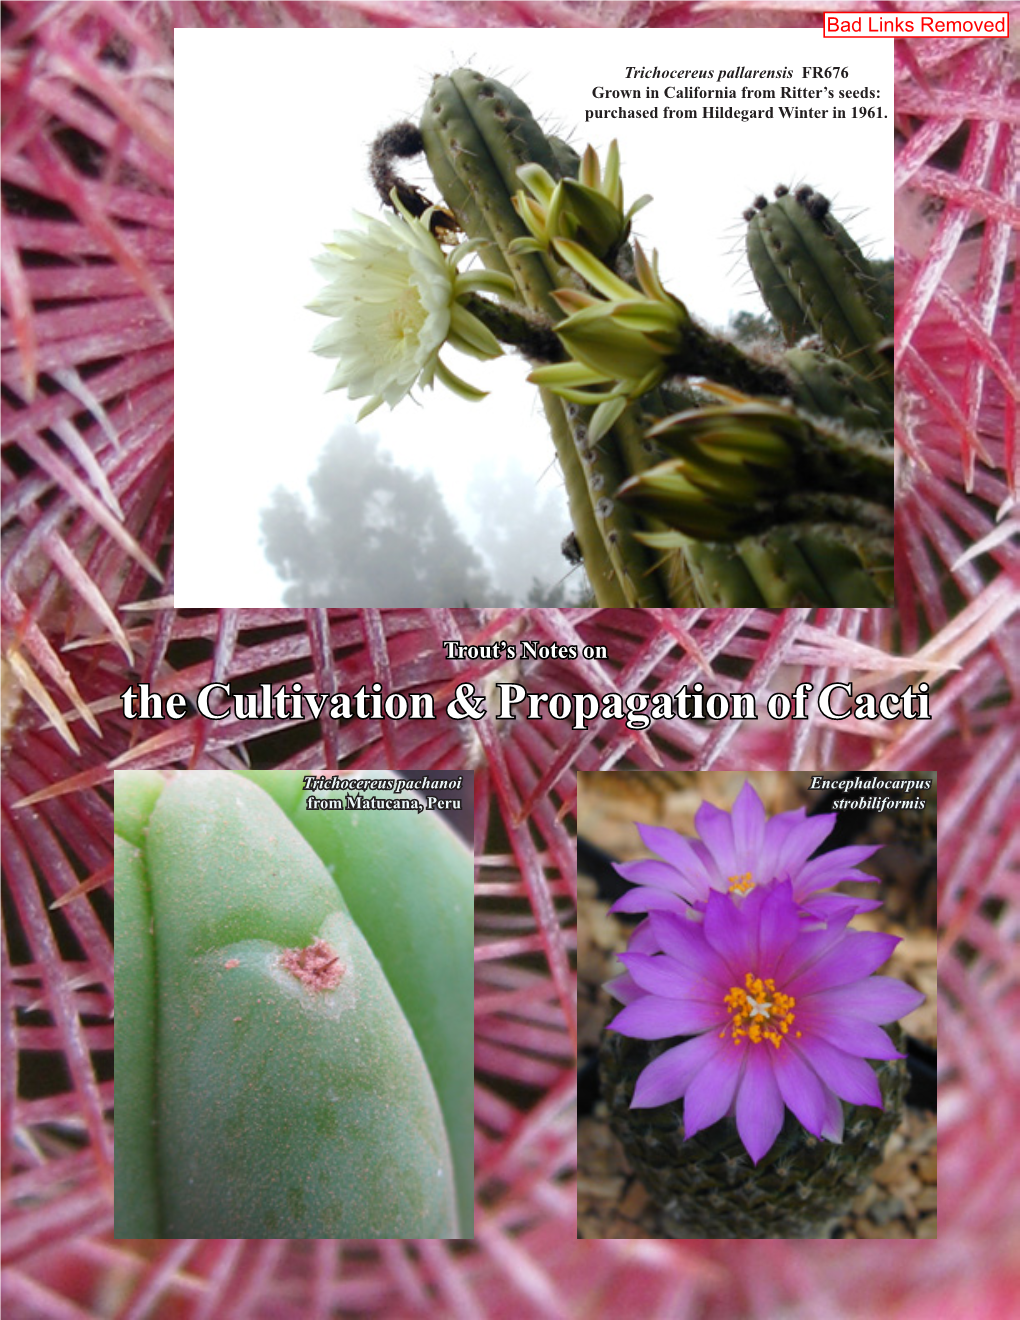 The Cultivation & Propagation of Cacti